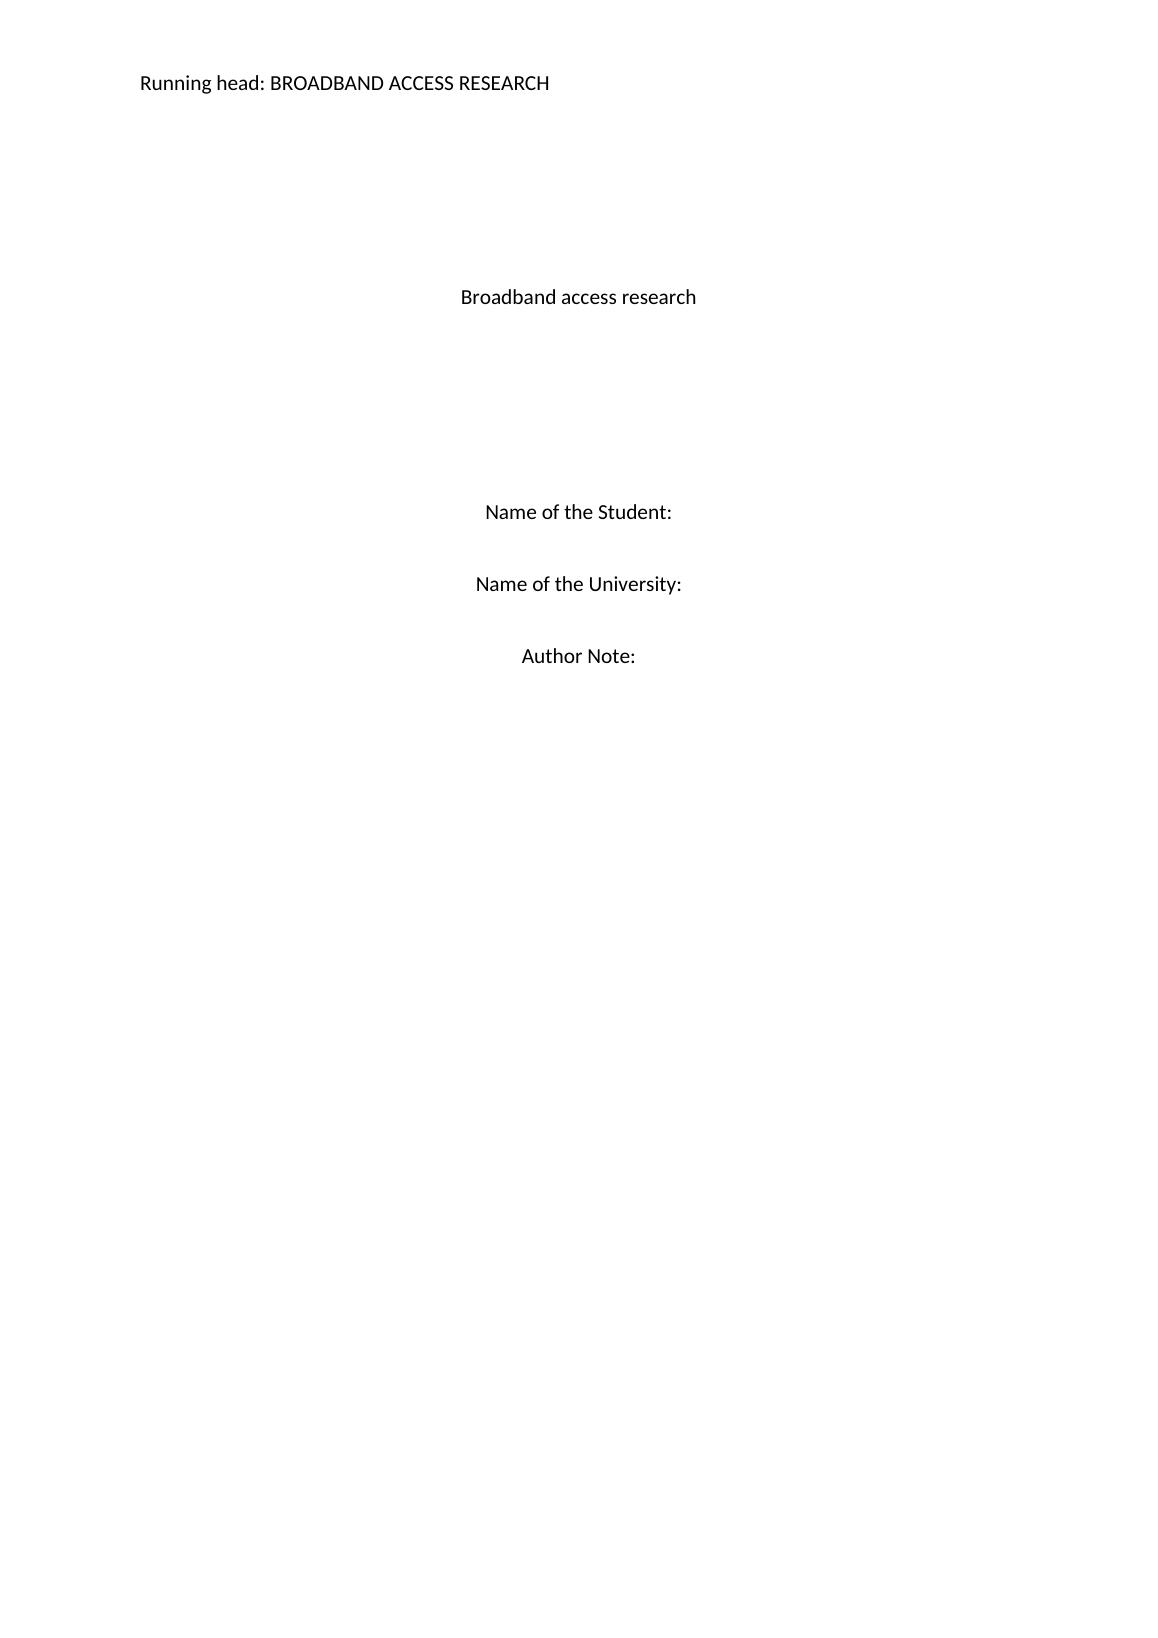 Broadband access Research Assignment PDF_1